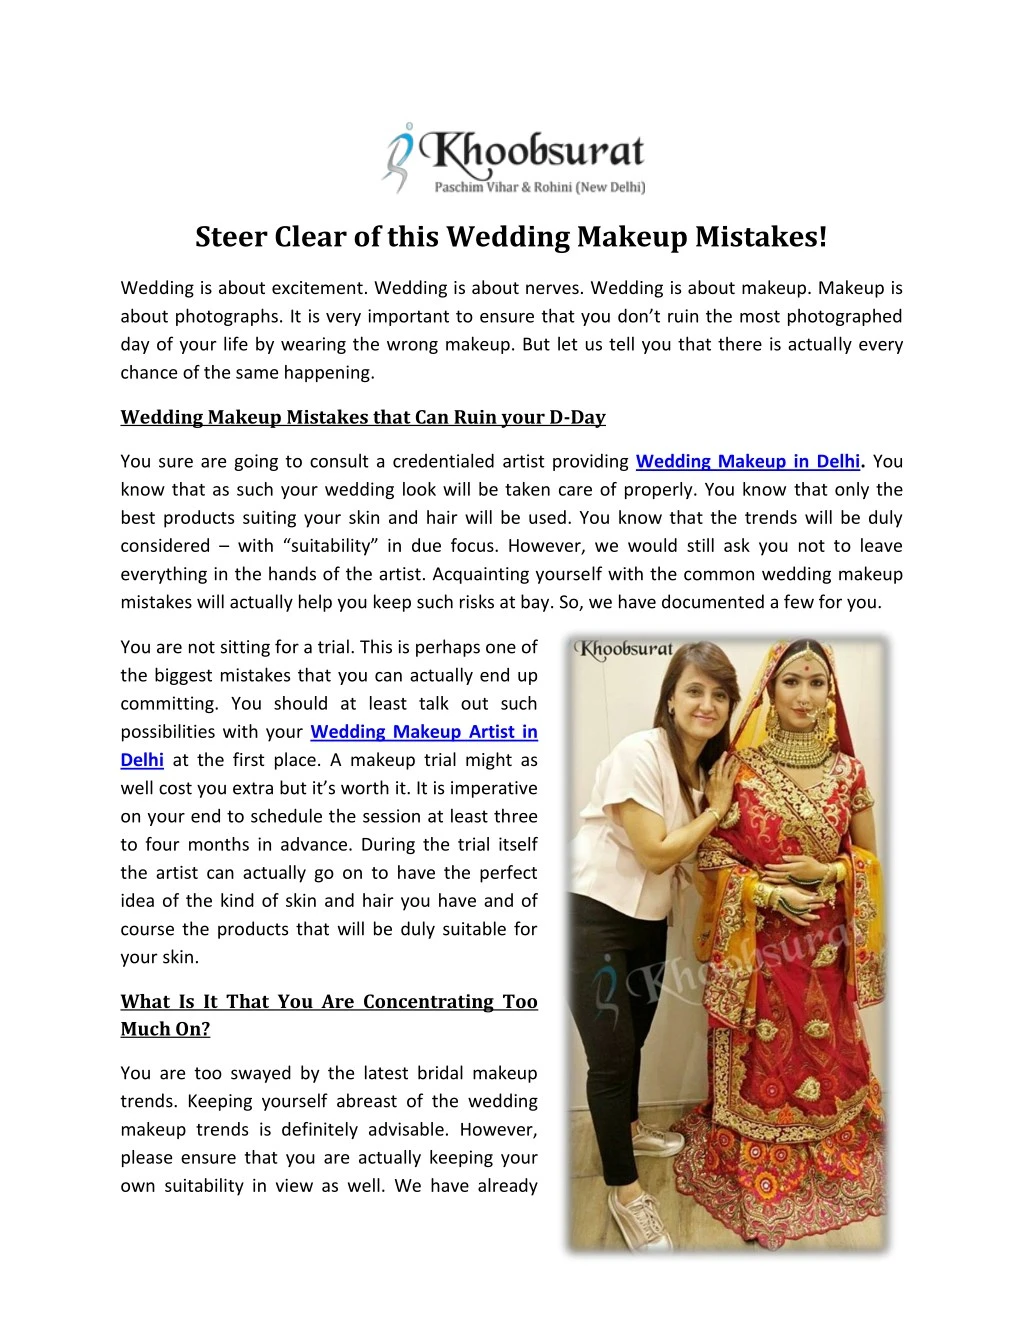 steer clear of this wedding makeup mistakes